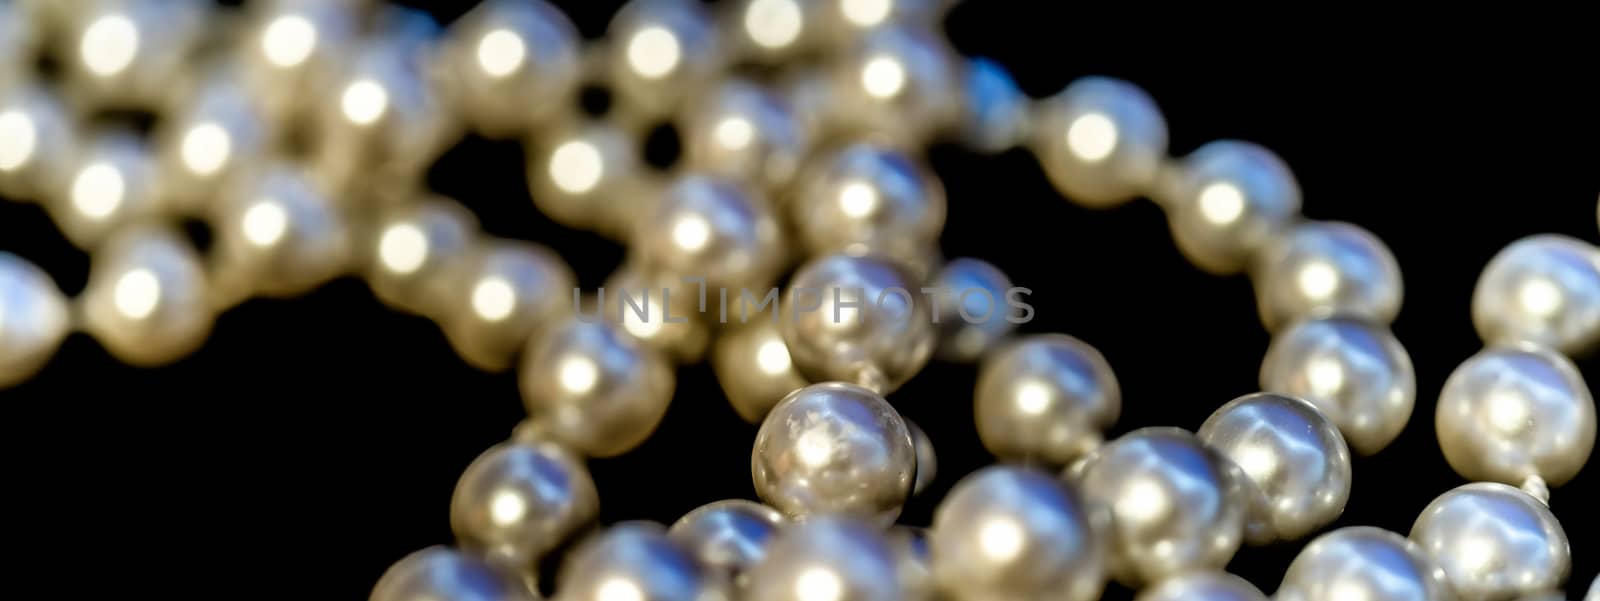 Abstract picture of a pearl necklace, front and back deliberately blurred, black background